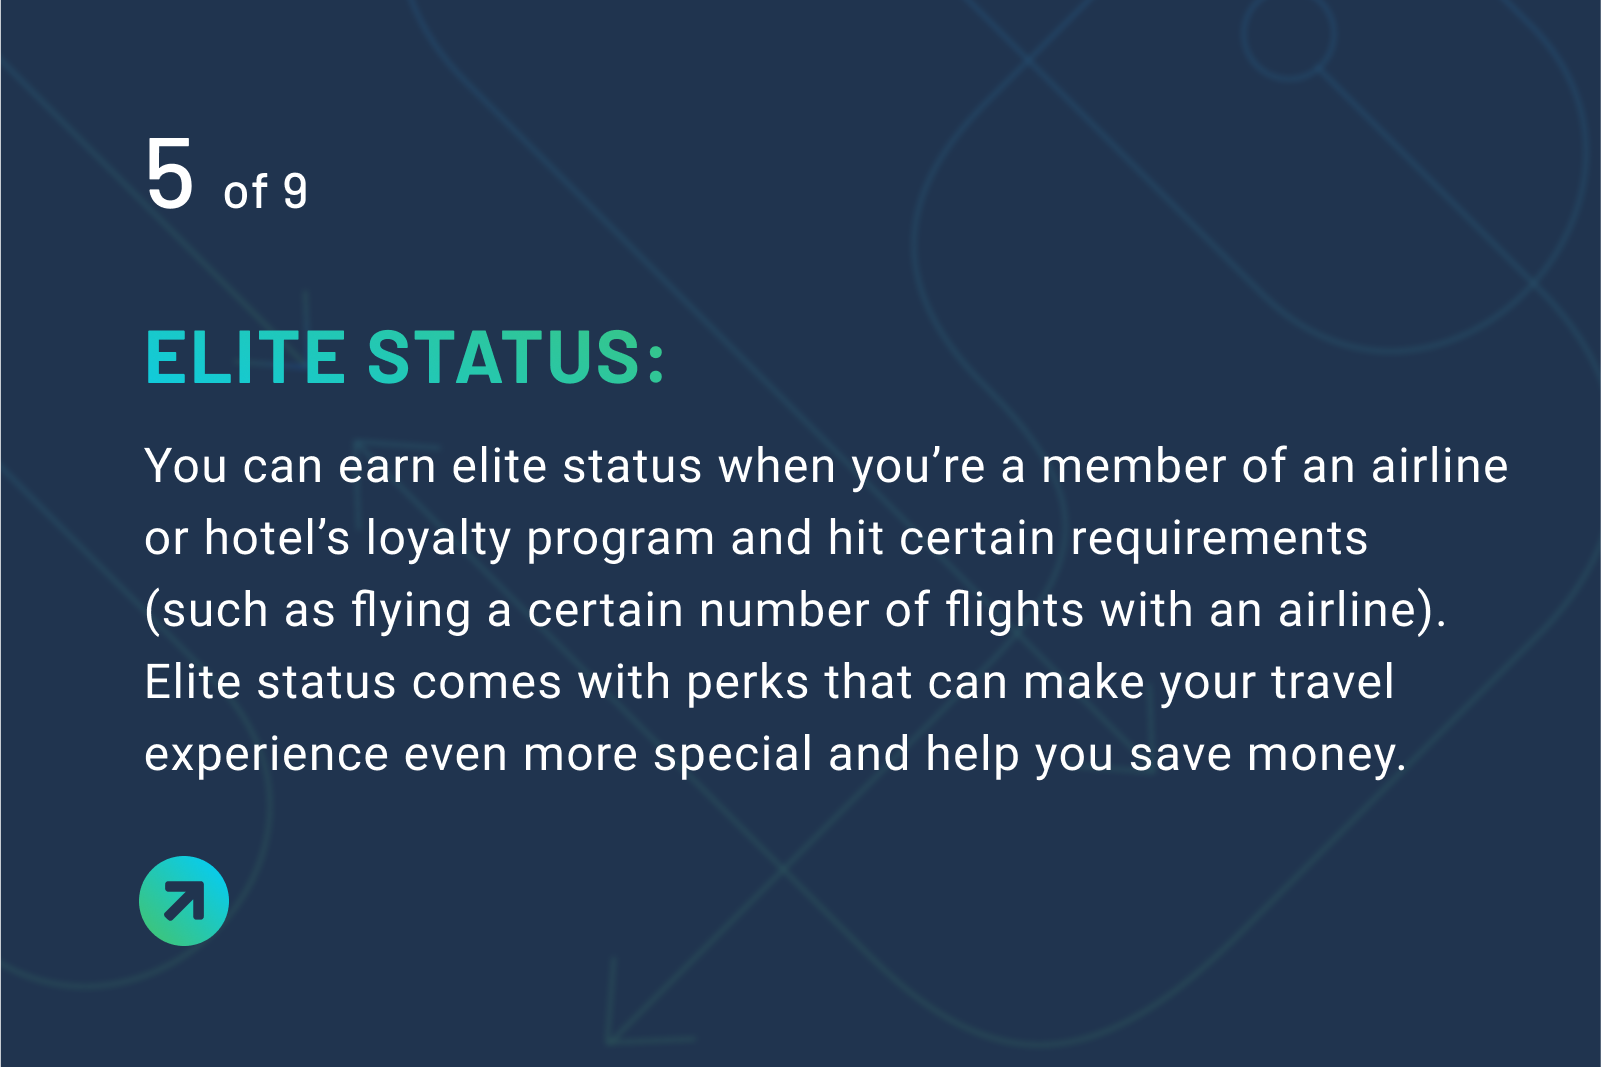 Elite status definition: You can earn elite status when you’re a member of an airline or hotel’s loyalty program and hit certain requirements (such as flying a certain number of flights with an airline). Elite status comes with perks that can make your travel experience even more special and help you save money.